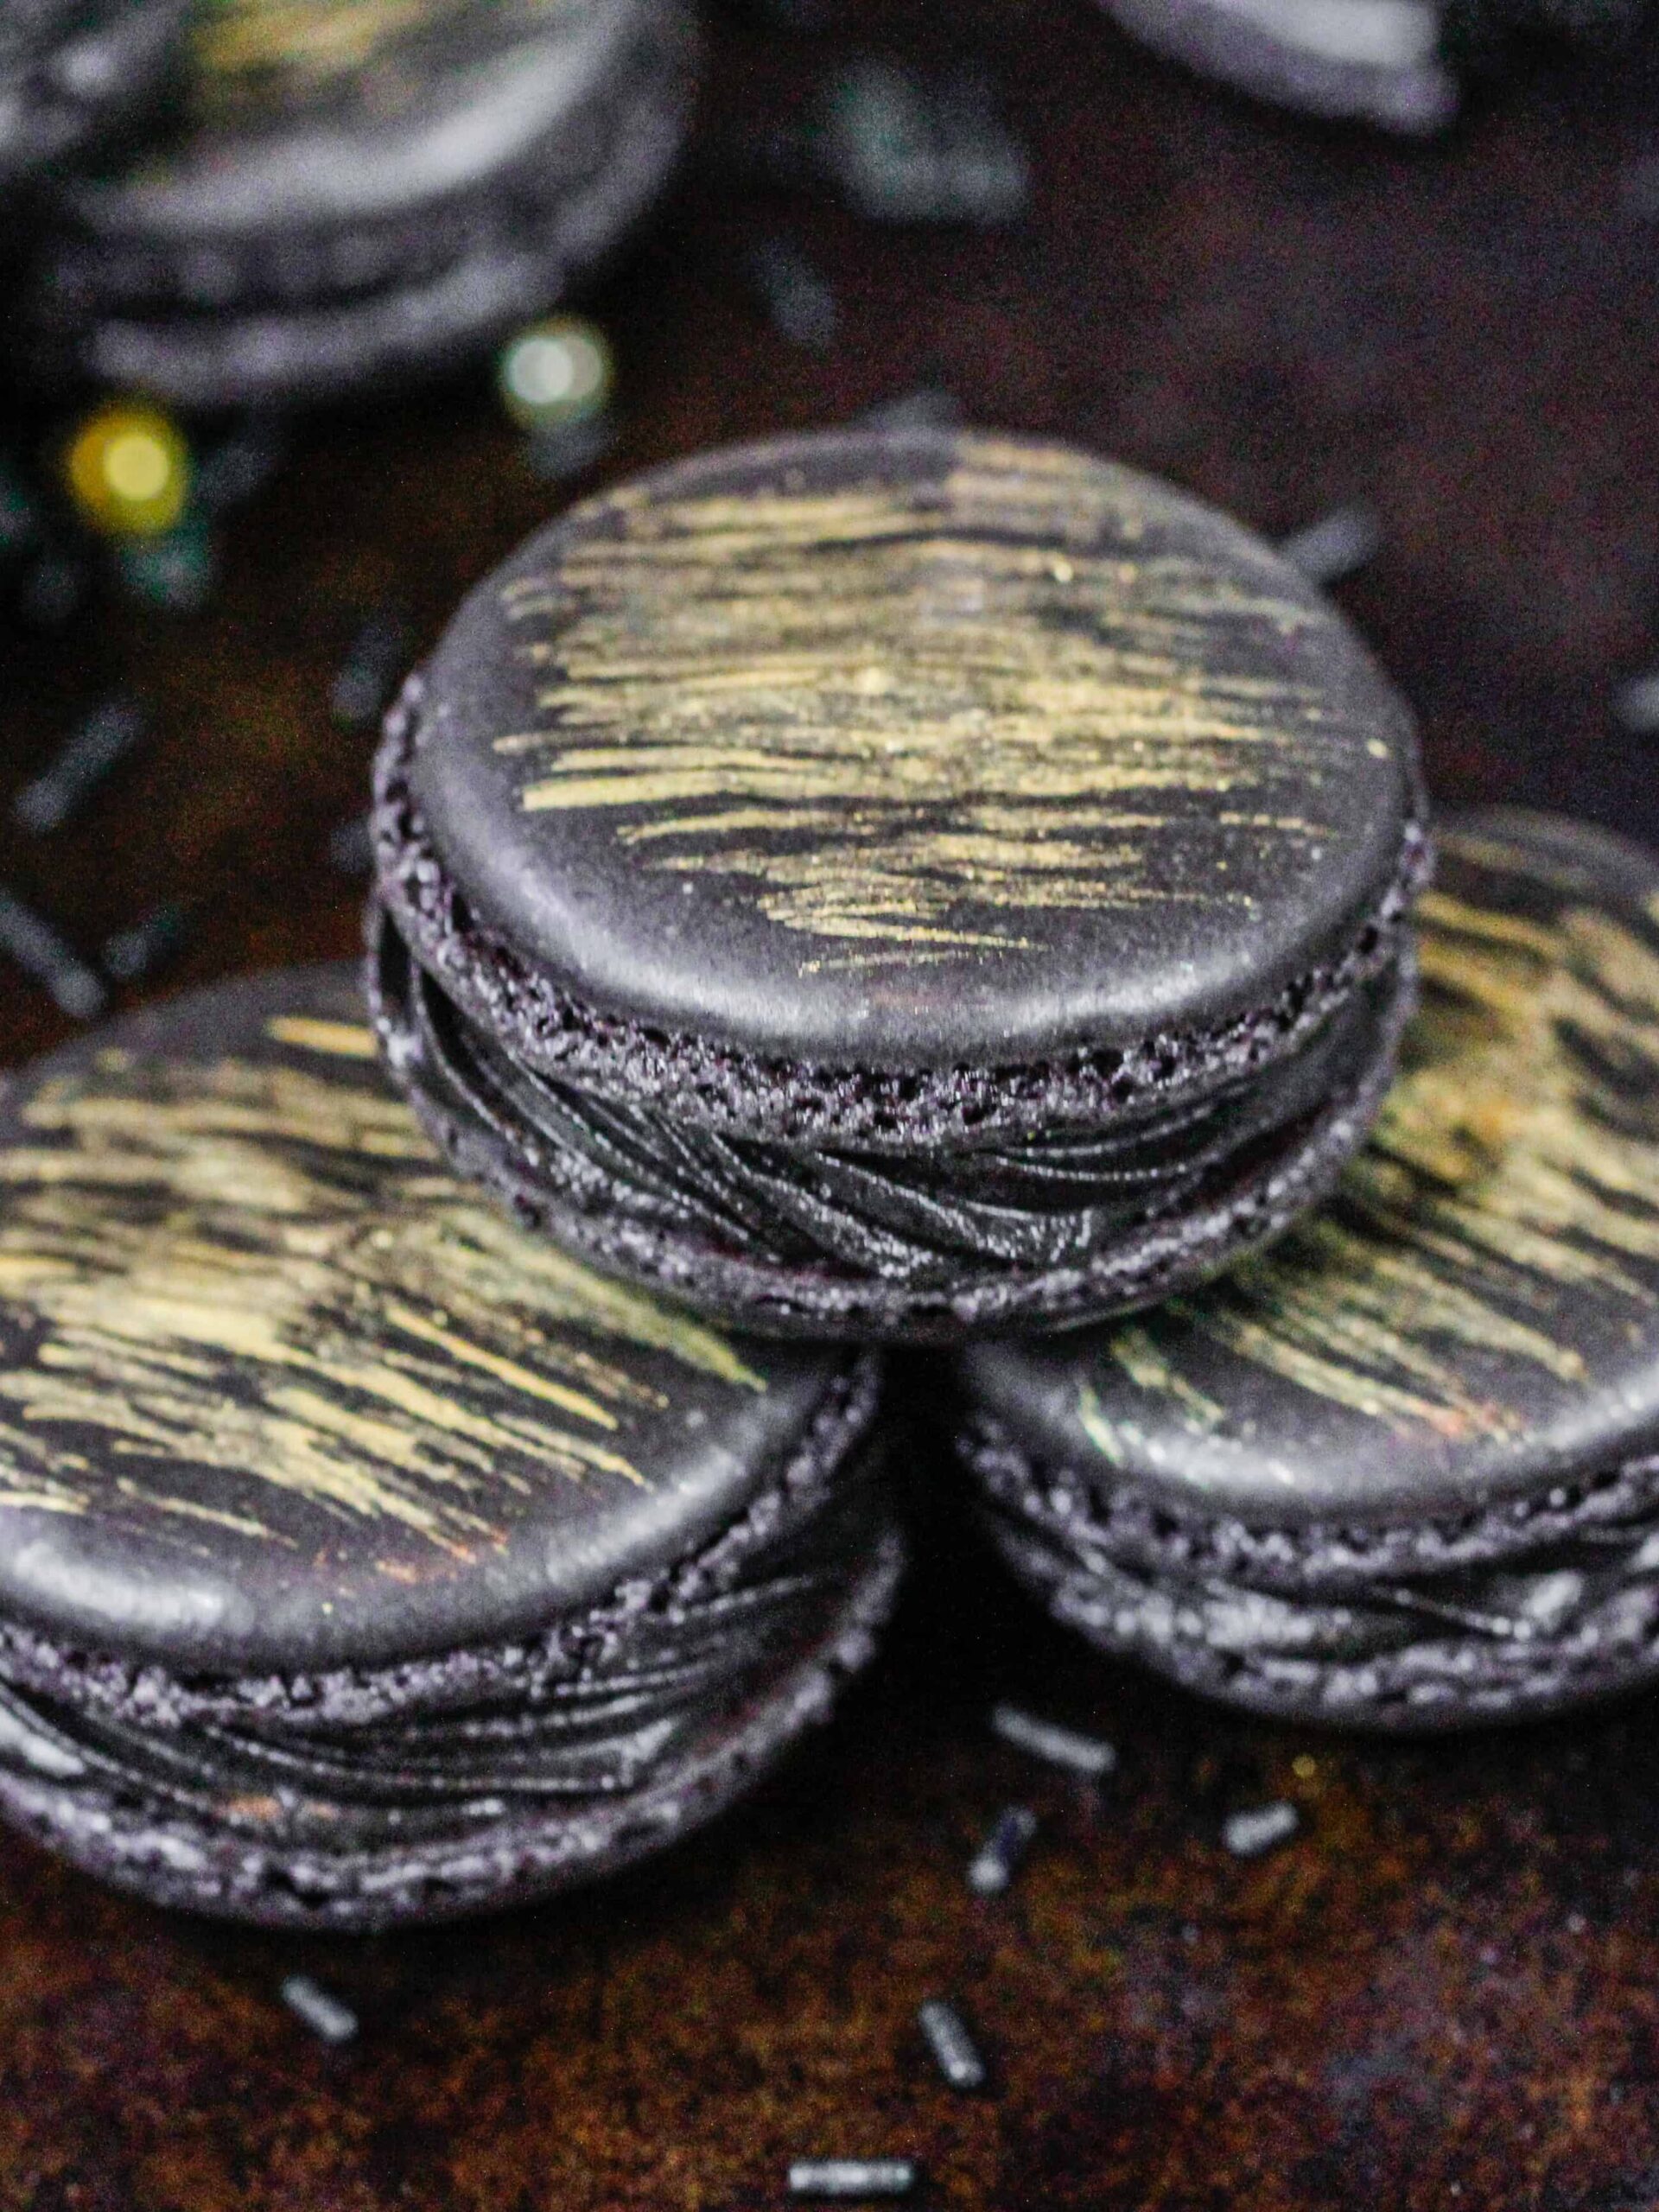 image of french black macarons that have been filled with black frosting and brushed with a beautiful gold streak of edible gold paint